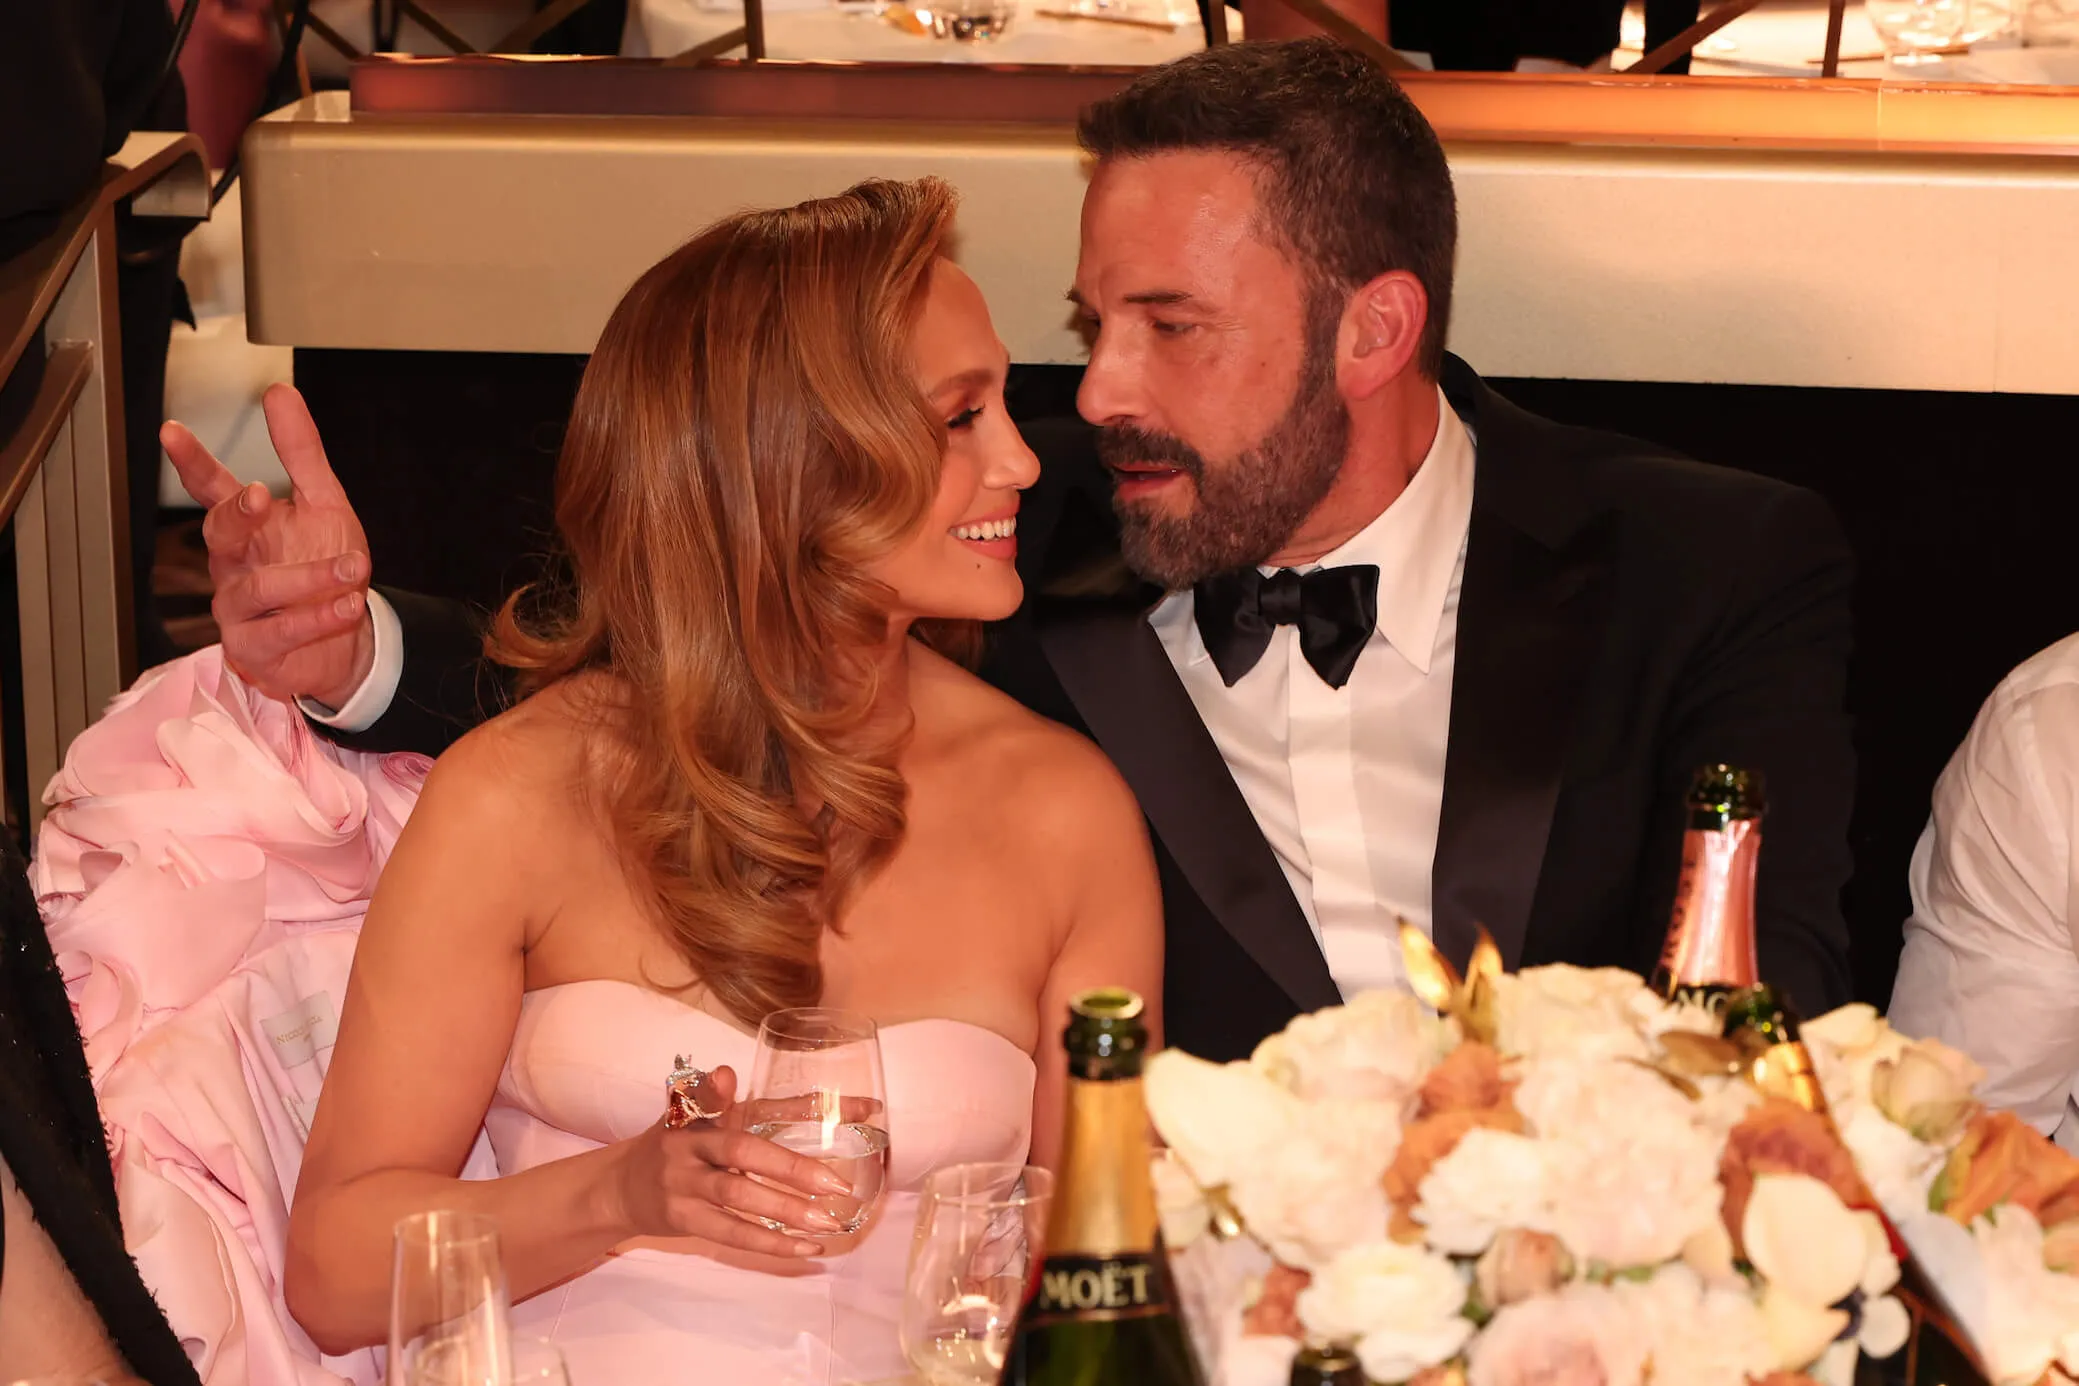 Jennifer Lopez and Ben Affleck facing each other and smiling at the 81st Golden Globe Awards held at the Beverly Hilton Hotel